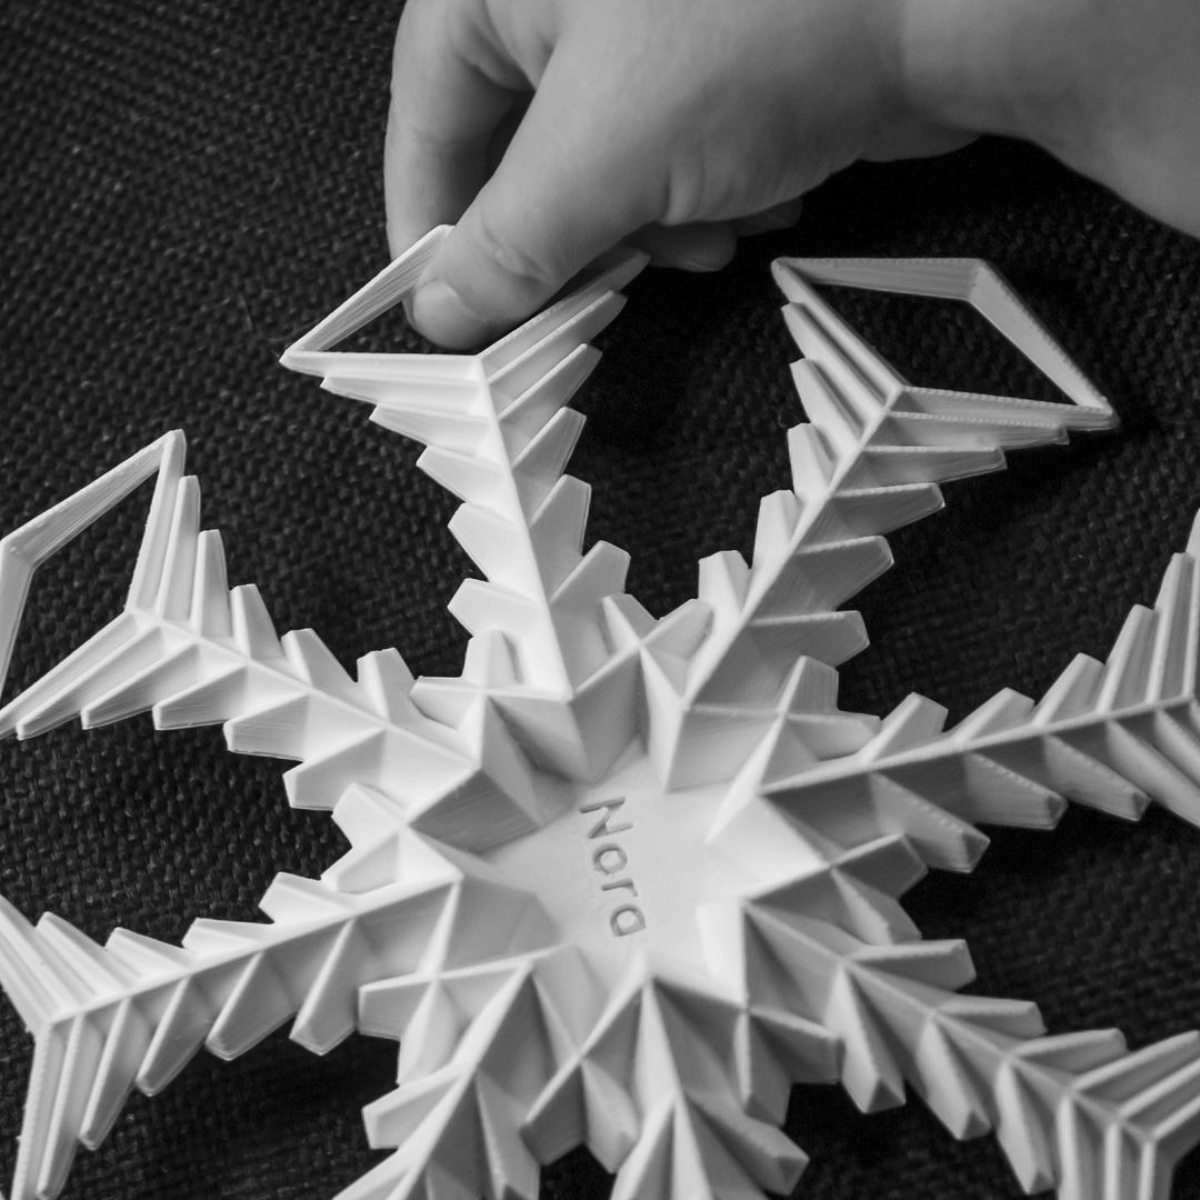 Picture showing a snowflake in child's hand